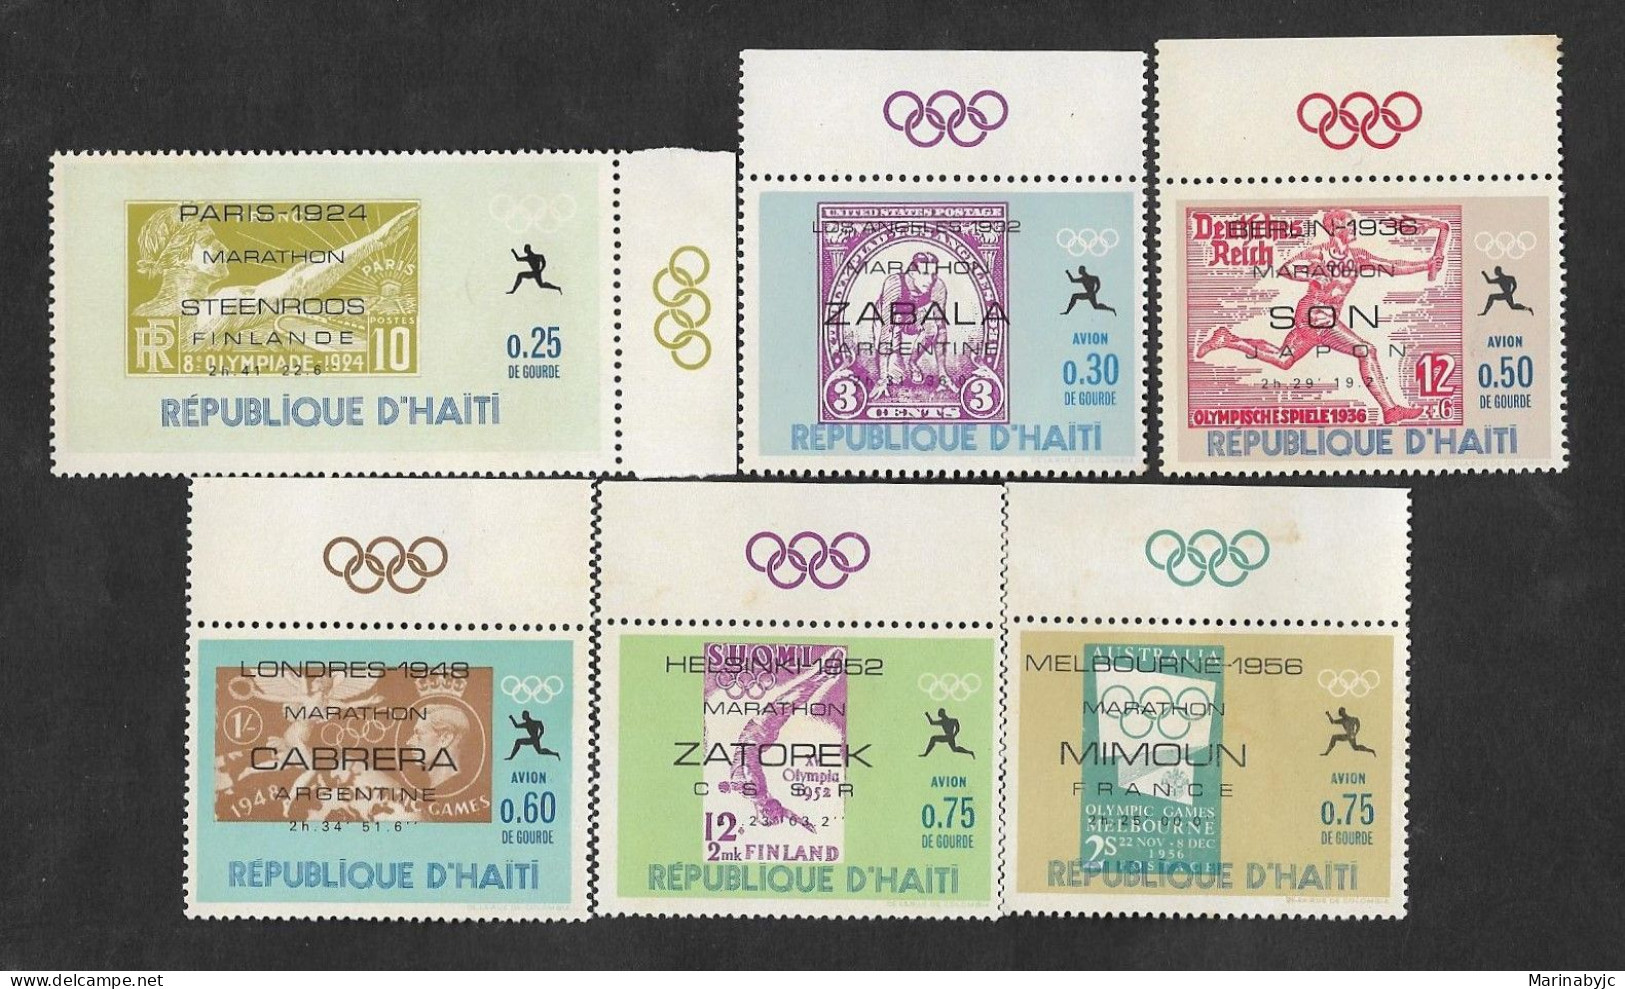 SE)1956 REPUBLIC OF HAITI  OLYMPIC GAMES STAMP SERIES, WITH OVERLOAD, 6 MINT STAMPS WITH HINGE - Haiti